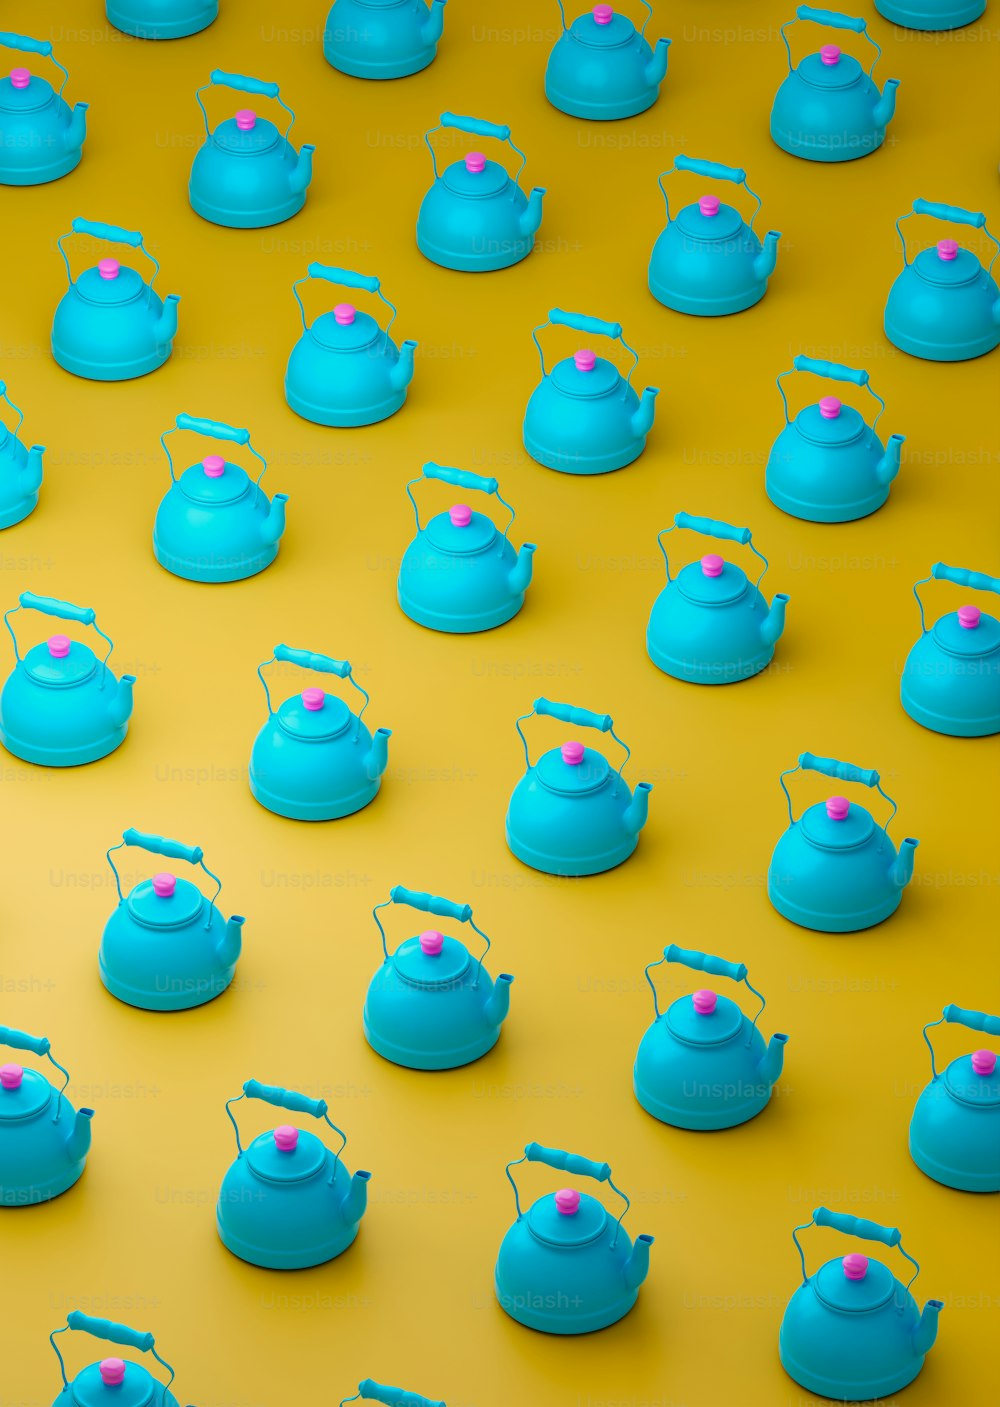 a group of tea kettles sitting on top of a yellow surface